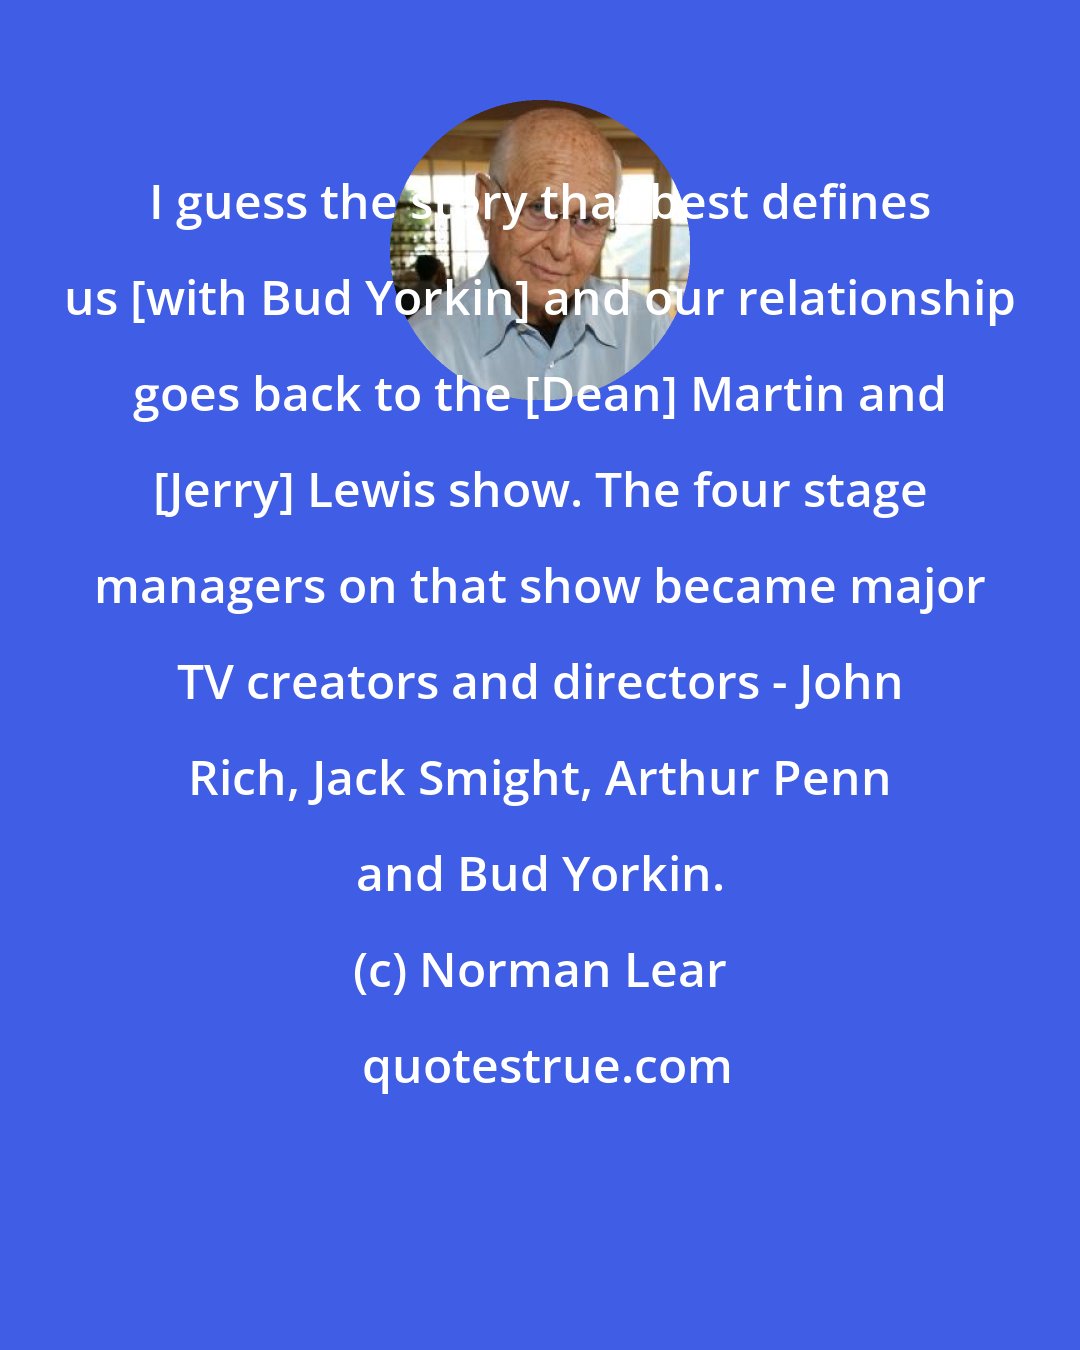 Norman Lear: I guess the story that best defines us [with Bud Yorkin] and our relationship goes back to the [Dean] Martin and [Jerry] Lewis show. The four stage managers on that show became major TV creators and directors - John Rich, Jack Smight, Arthur Penn and Bud Yorkin.